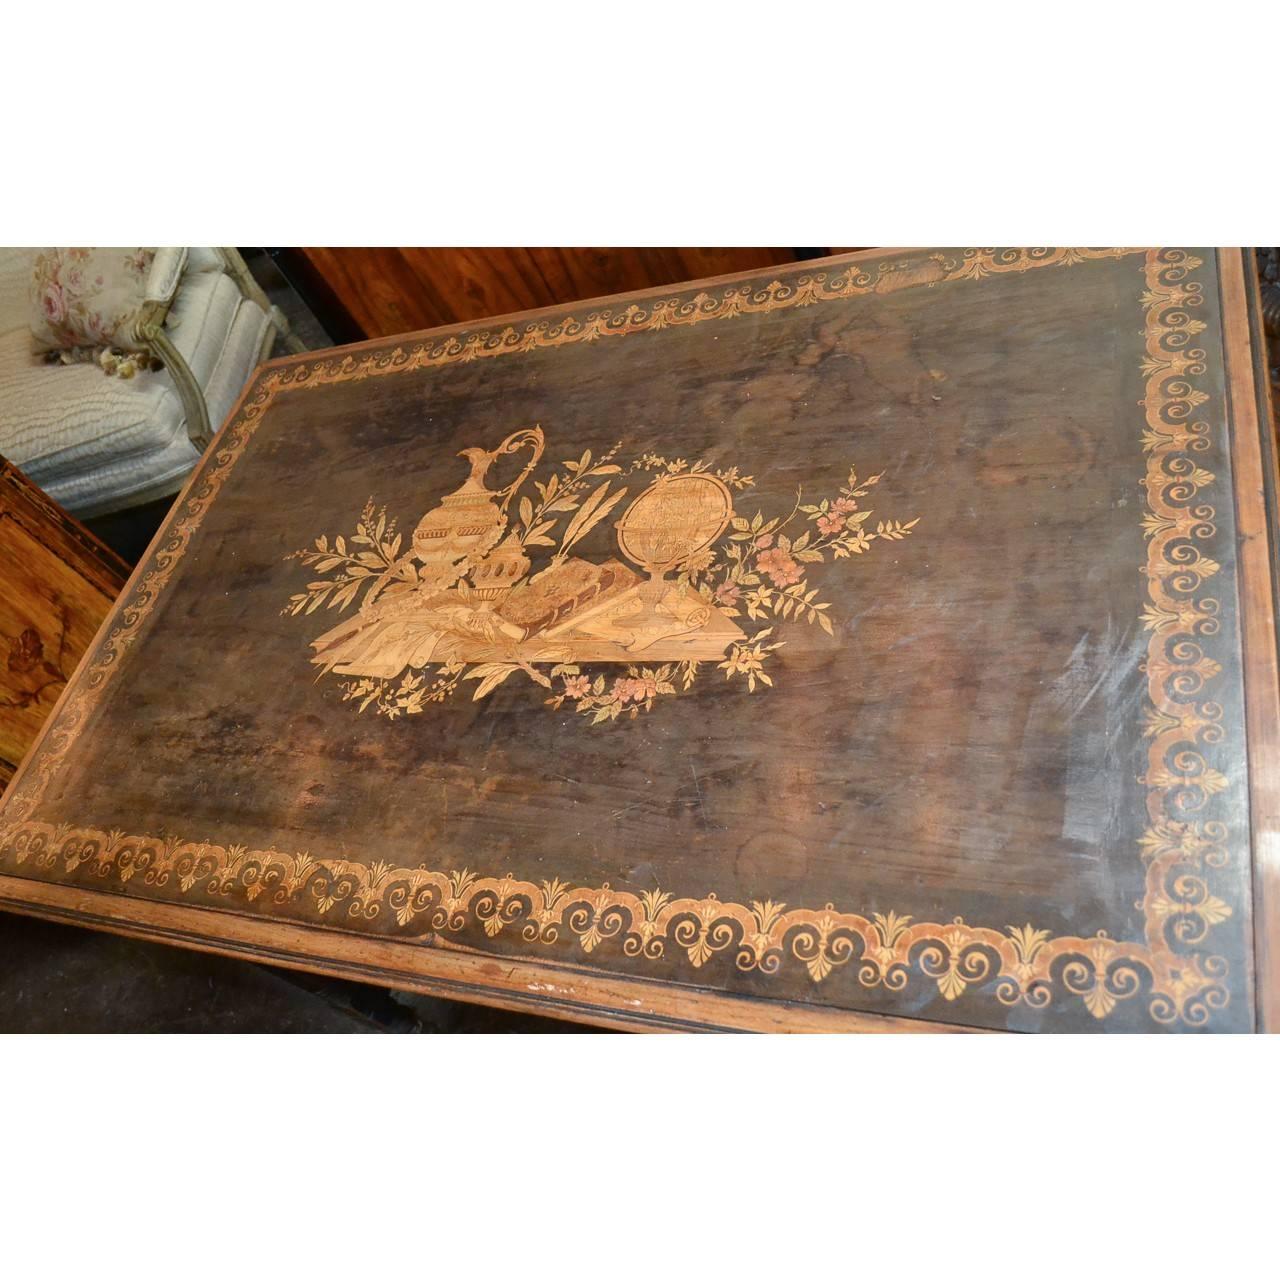 Exceptional 19th century French walnut writing table or desk. The top with outstanding exotic wood marquetry inlays depicting an urn, inkwell, a book, world globe, and parchment amidst colorful leaf and floral sprays. The border with additional